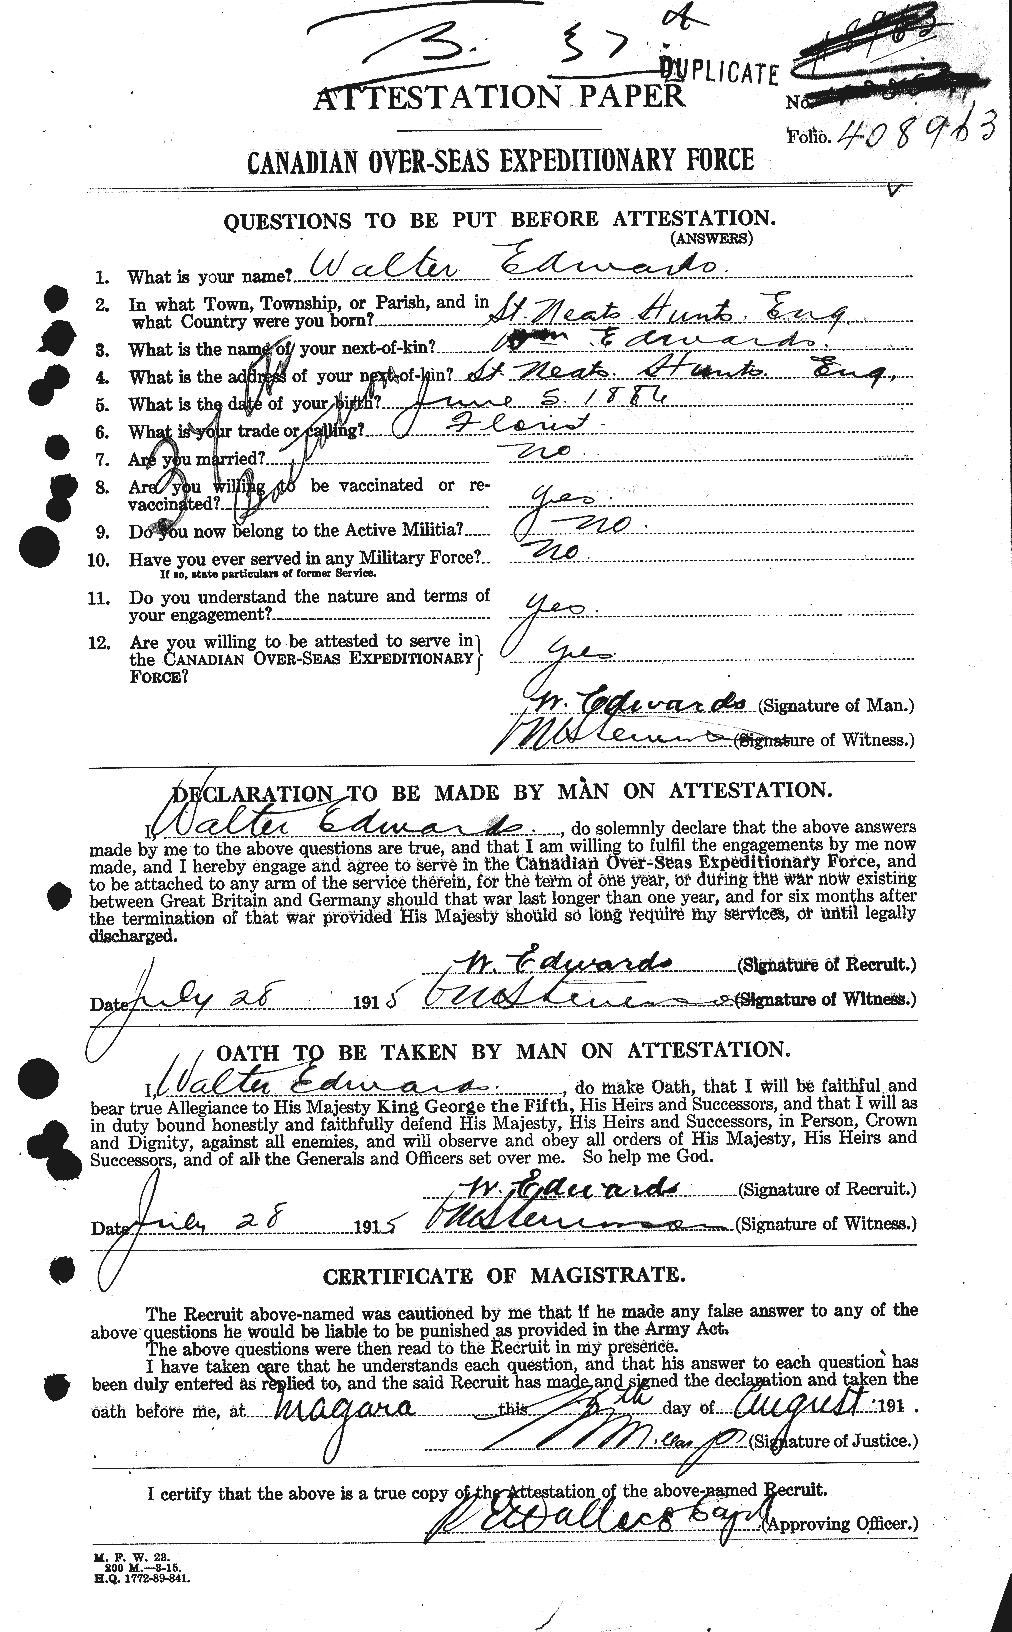 Personnel Records of the First World War - CEF 310364a